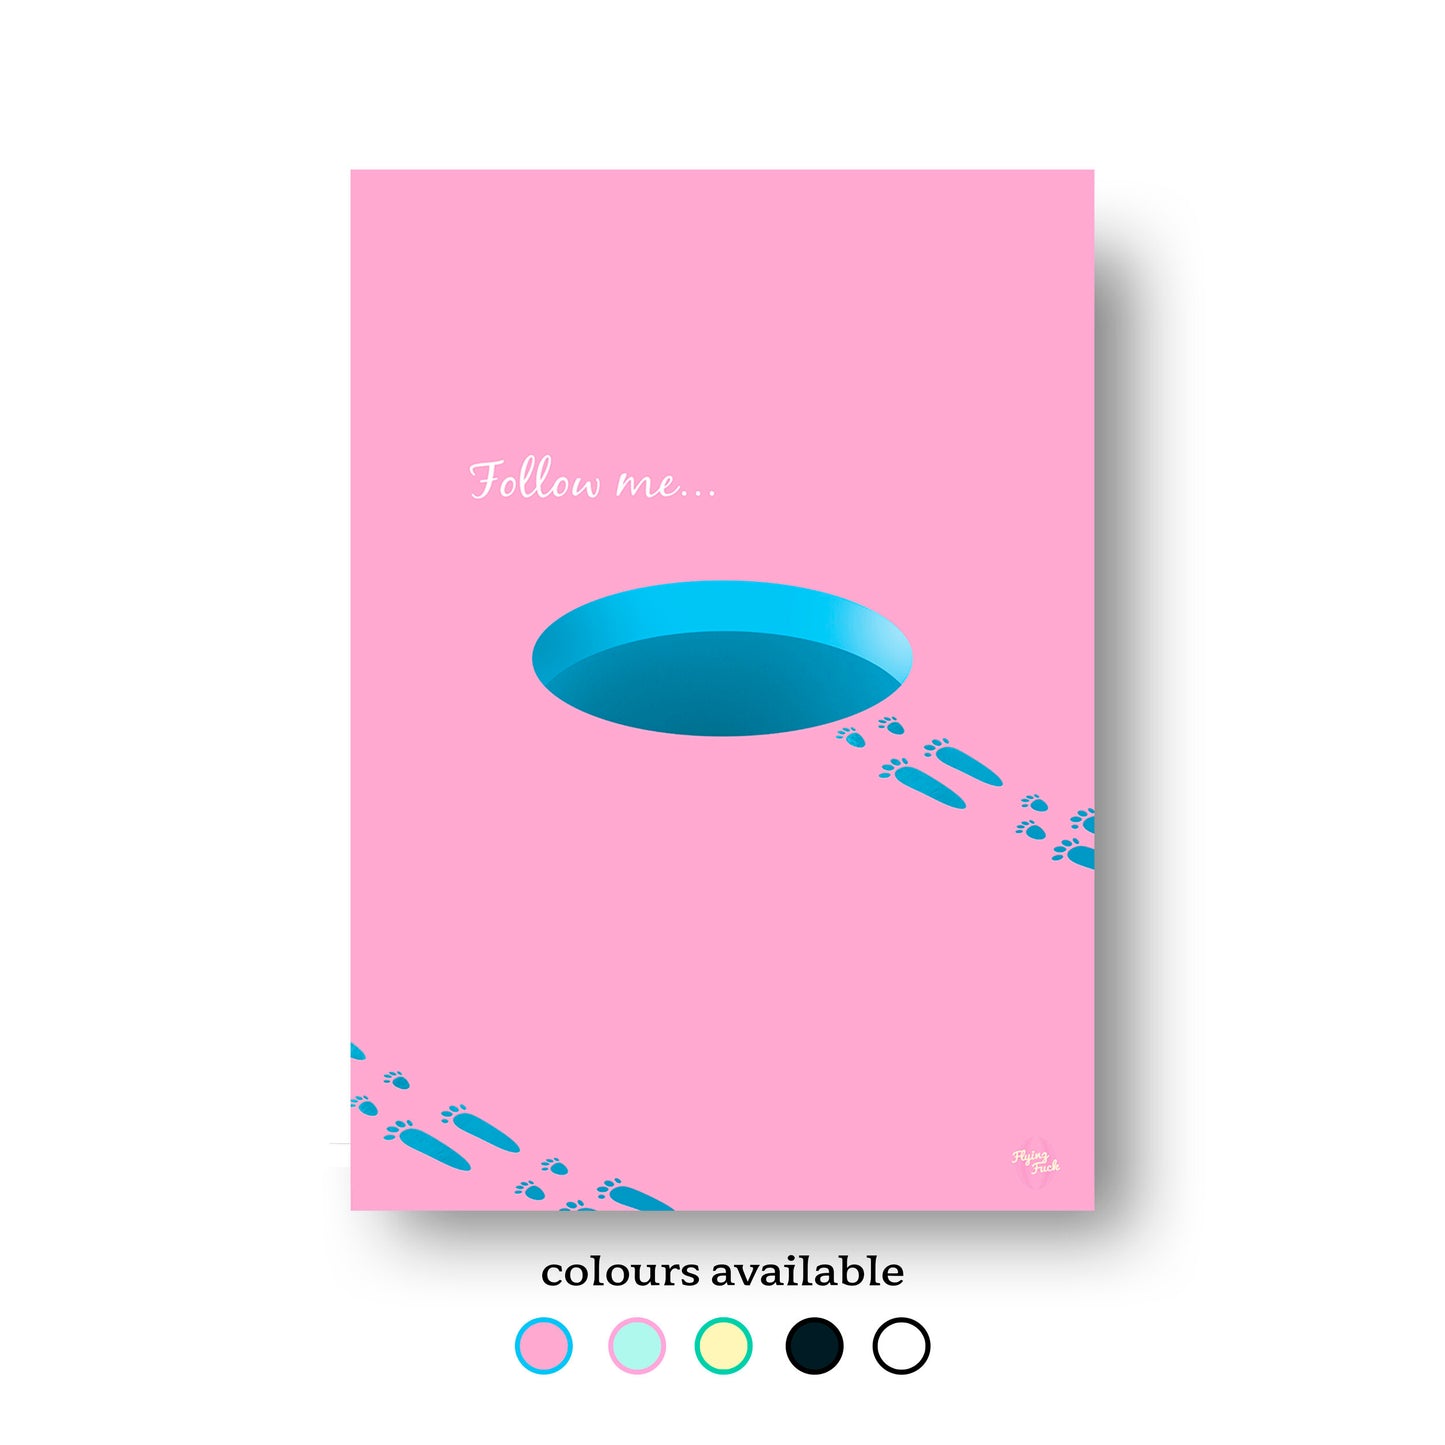 NOKUKO - art - Flying Fuck - Follow me - all colours available